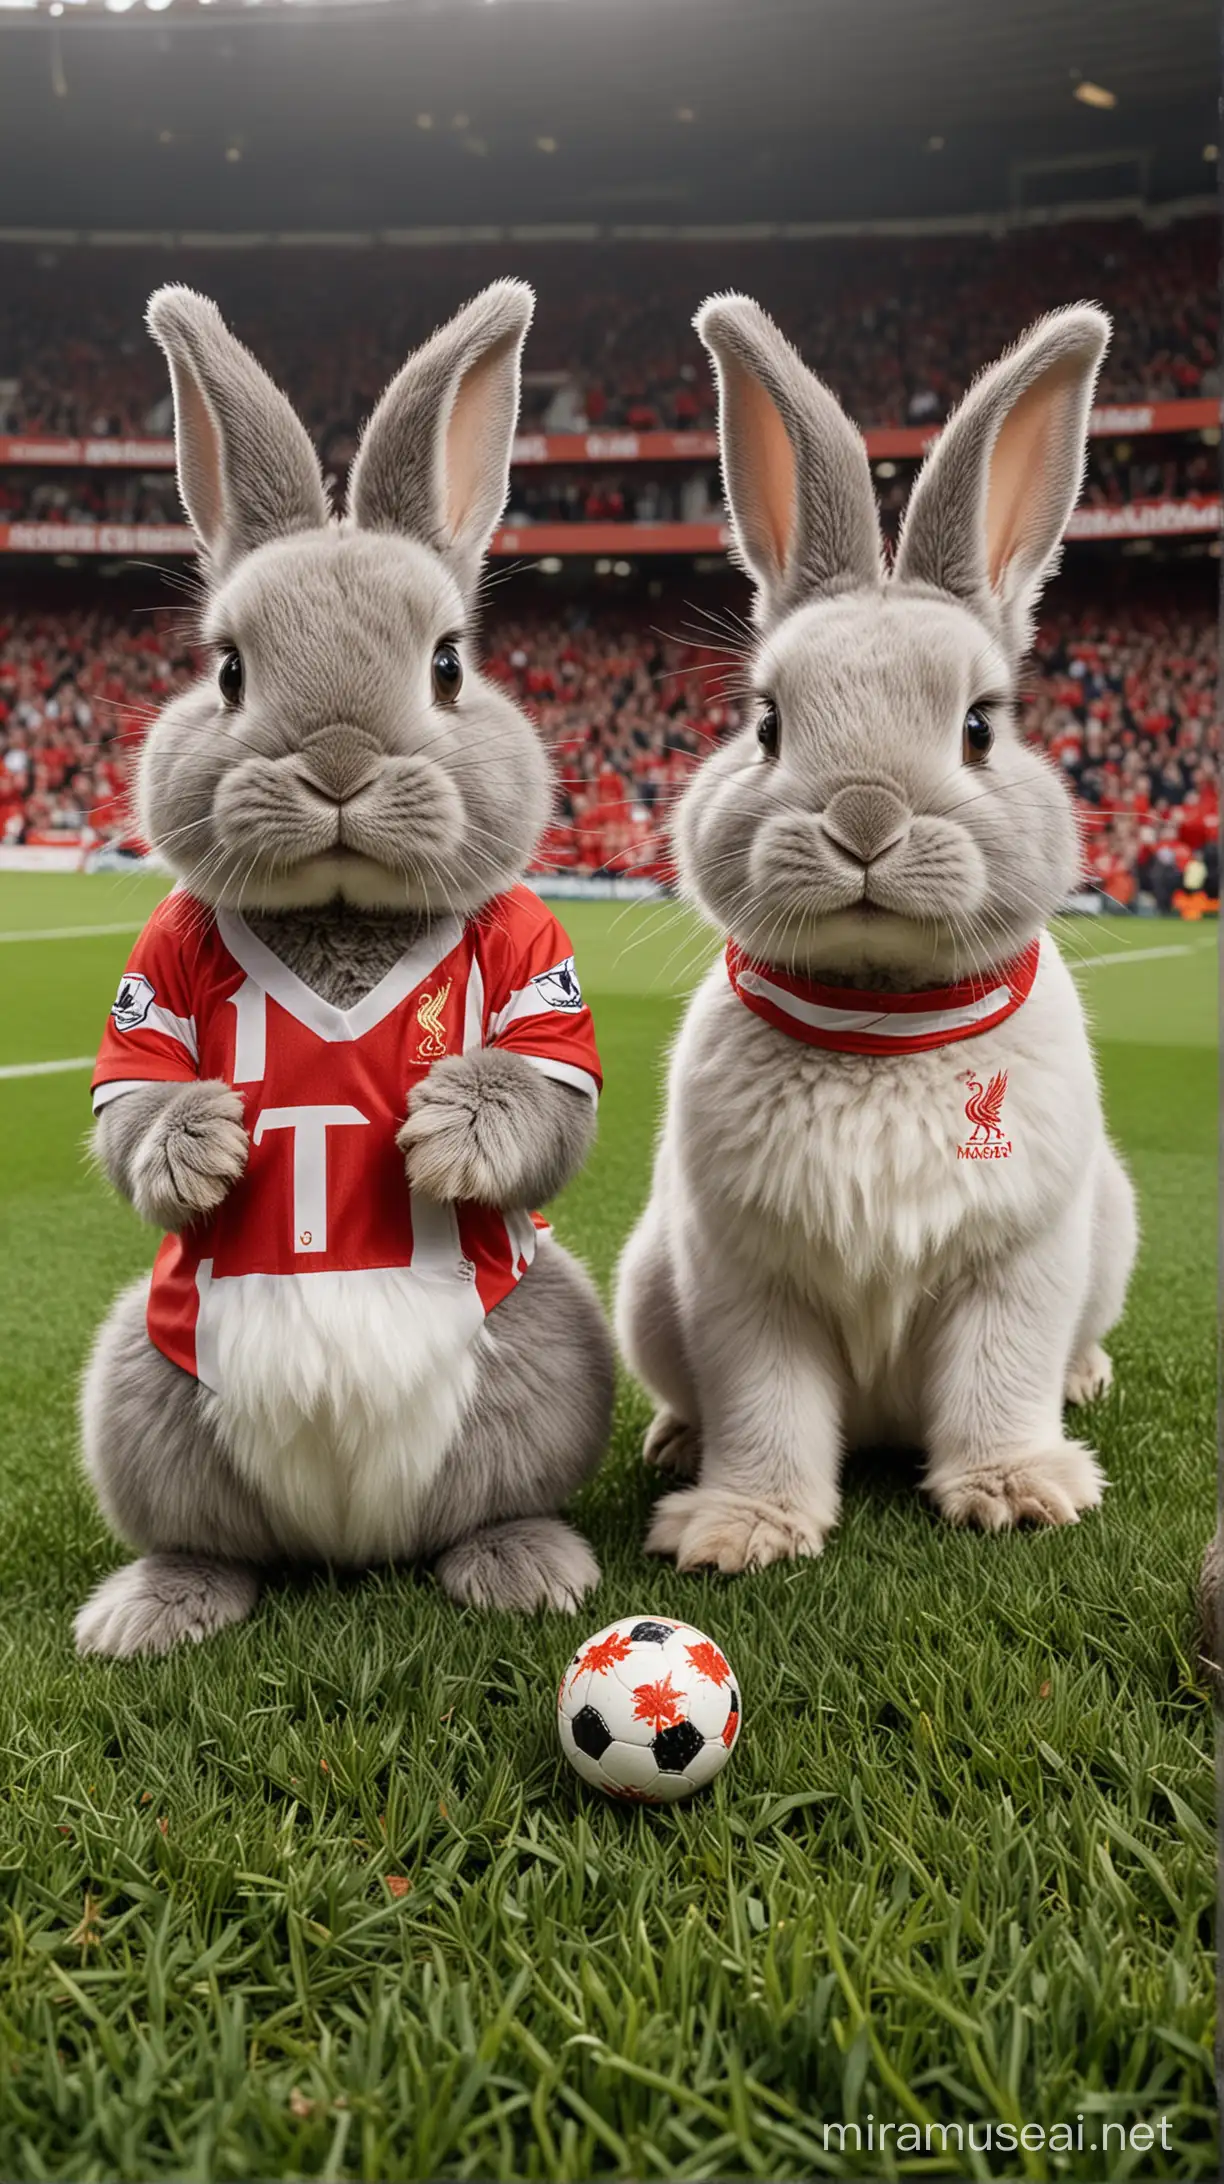 Two cute (((rabbits))), one black with a prominent white stripe running from nose to hindquarters, and a slightly larger gray rabbit with shorter, floppier ears, both sitting together in the iconic (Anfield Stadium) during a live game of soccer featuring Liverpool Football Club and Manchester city football club